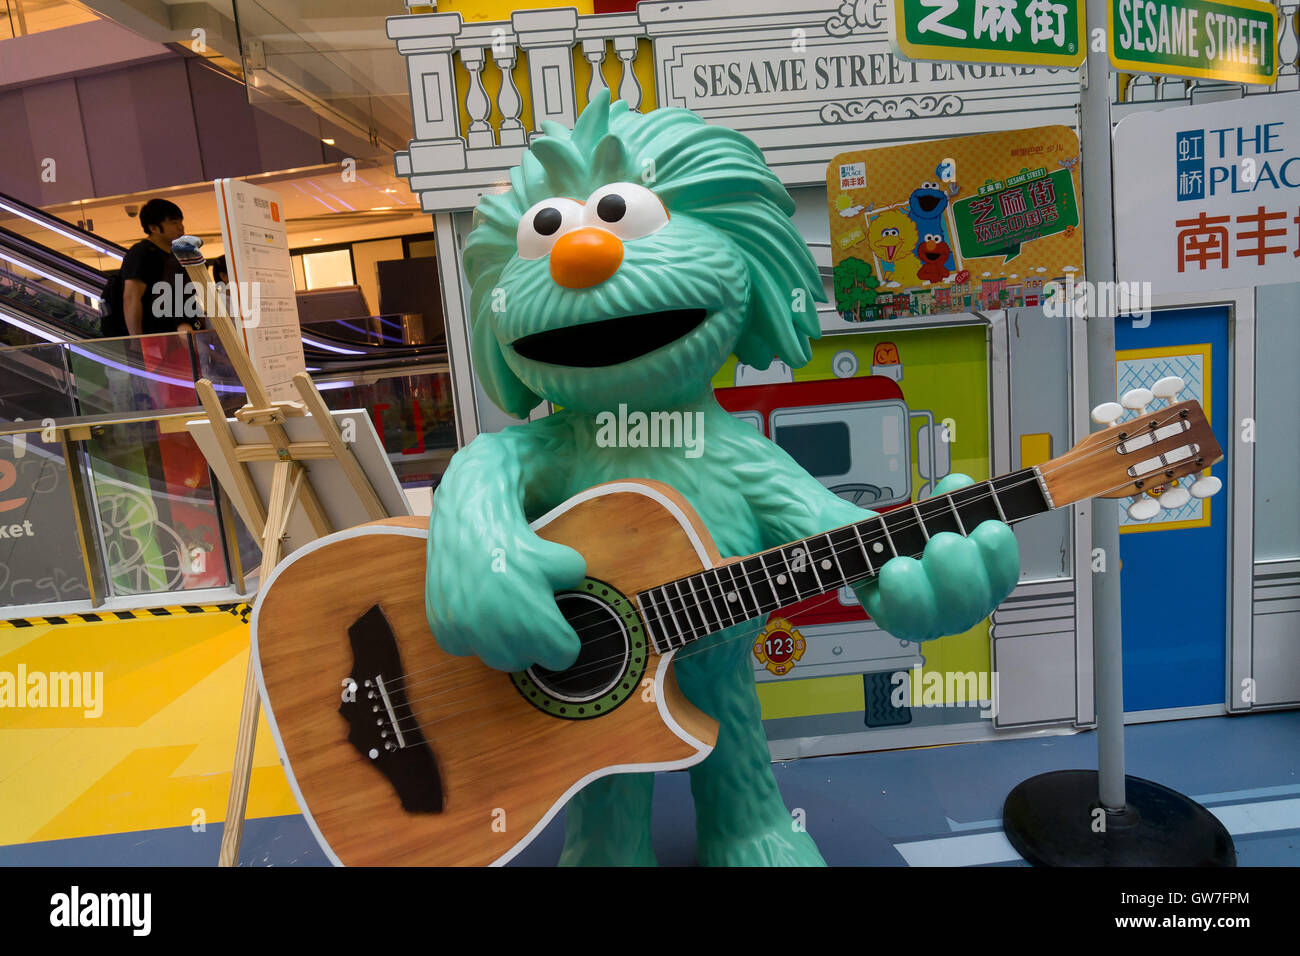 Shanghai, Shanghai, China. 13th Sep, 2016. Shanghai, CHINA- September 12 2016: (EDITORIAL USE ONLY. CHINA OUT) A cartoon statue at the Sesame Street in Shanghai. A cartoon-themed exhibition of Â¡Â®Sesame StreetÂ¡Â¯ is held at a shopping mall in Shanghai, attracting lots of children and their parents. Sesame Street is a long-running American children's television series. The program is known for its educational content, and images communicated through the use of Jim Henson's Muppets, animation, short films, humor, and cultural references. The series premiered on November 10, 1969, to posit Stock Photo